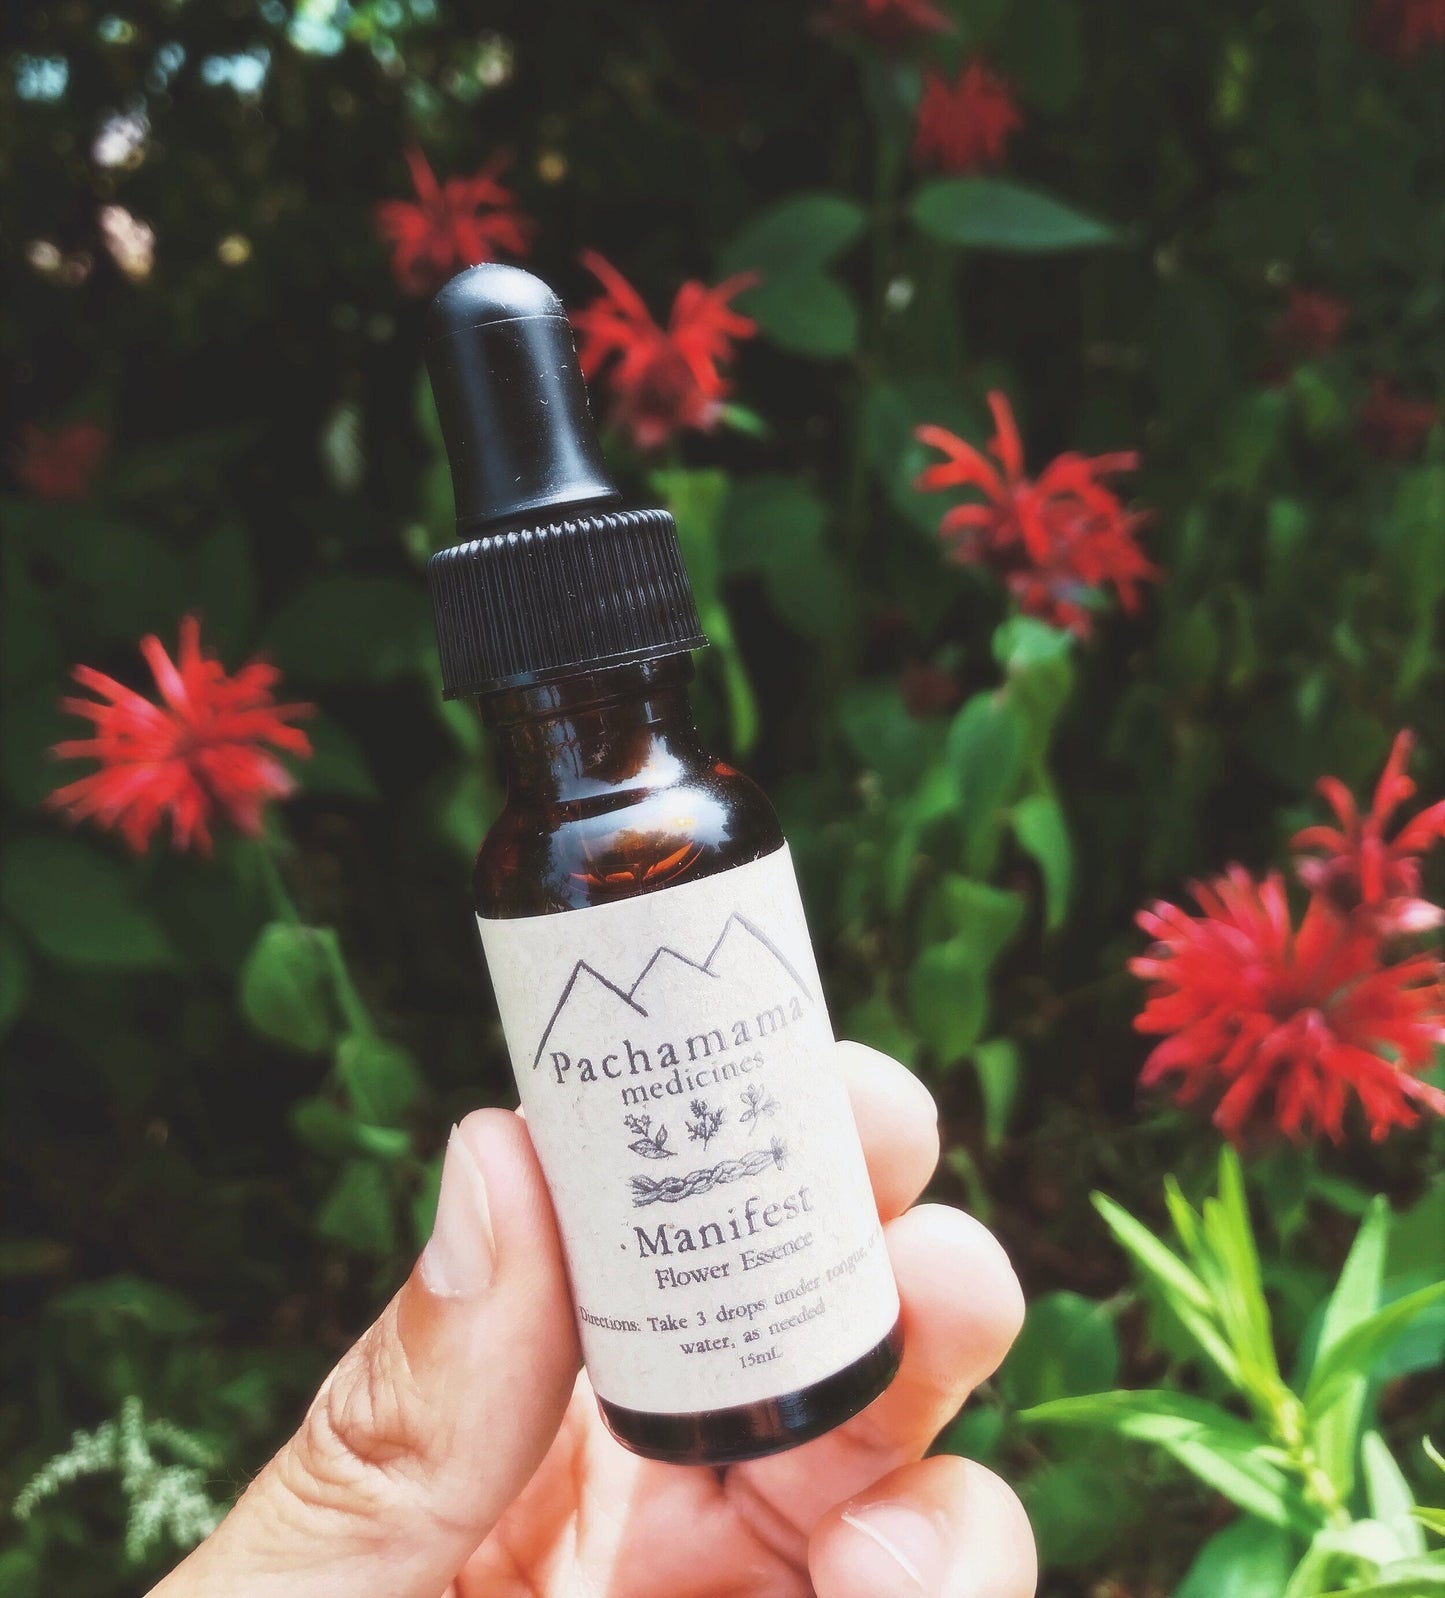 Manifest {{aka Alignment with your Highest Self}} Flower Essence